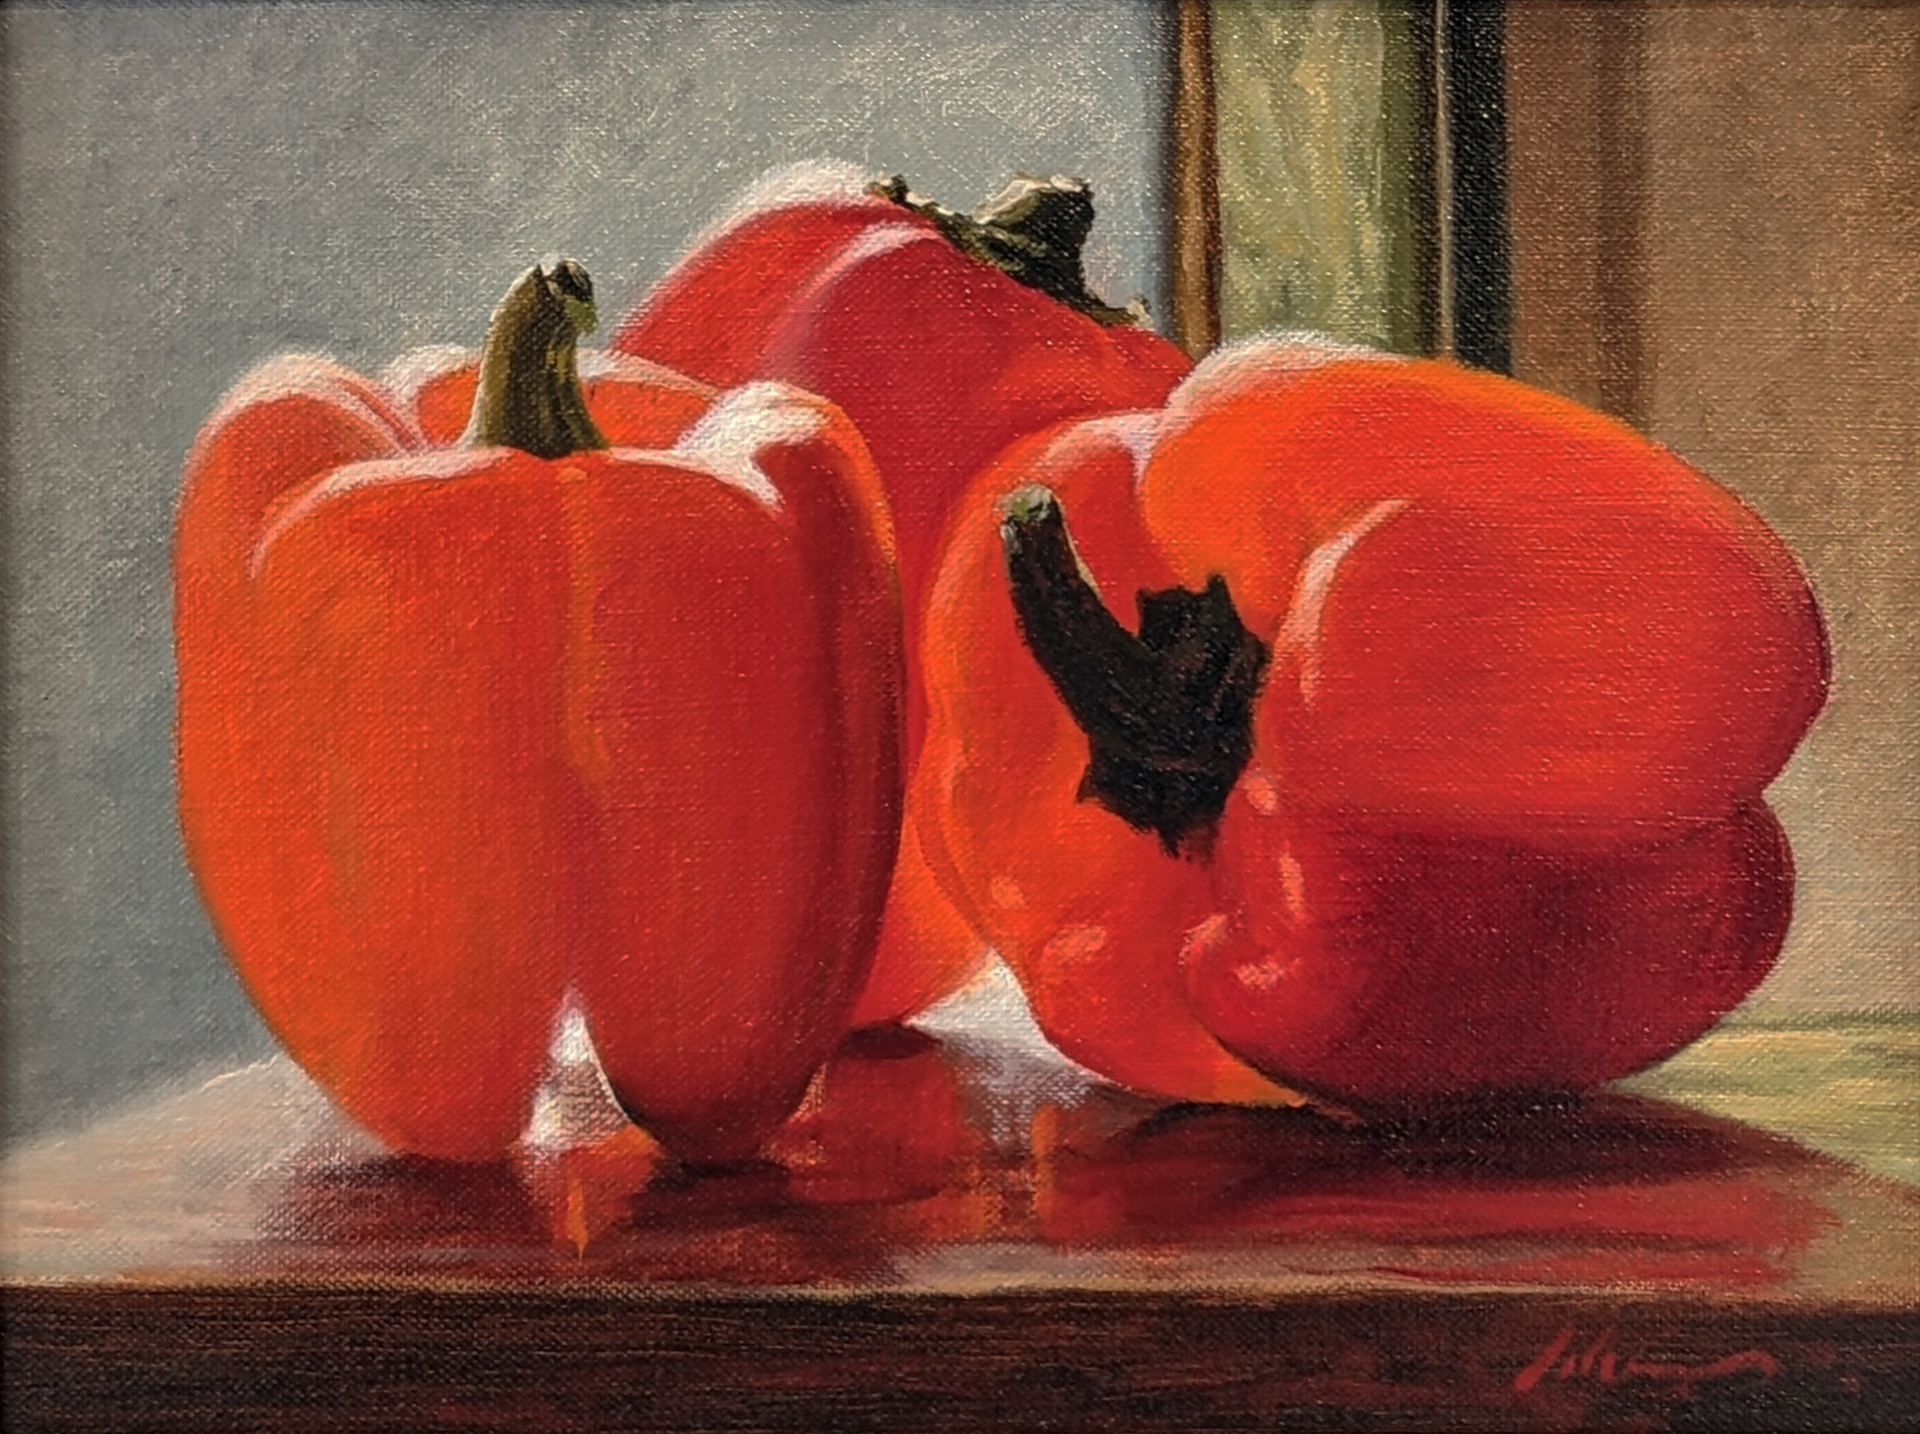 Morning with Red Peppers by Michael Lynn Adams